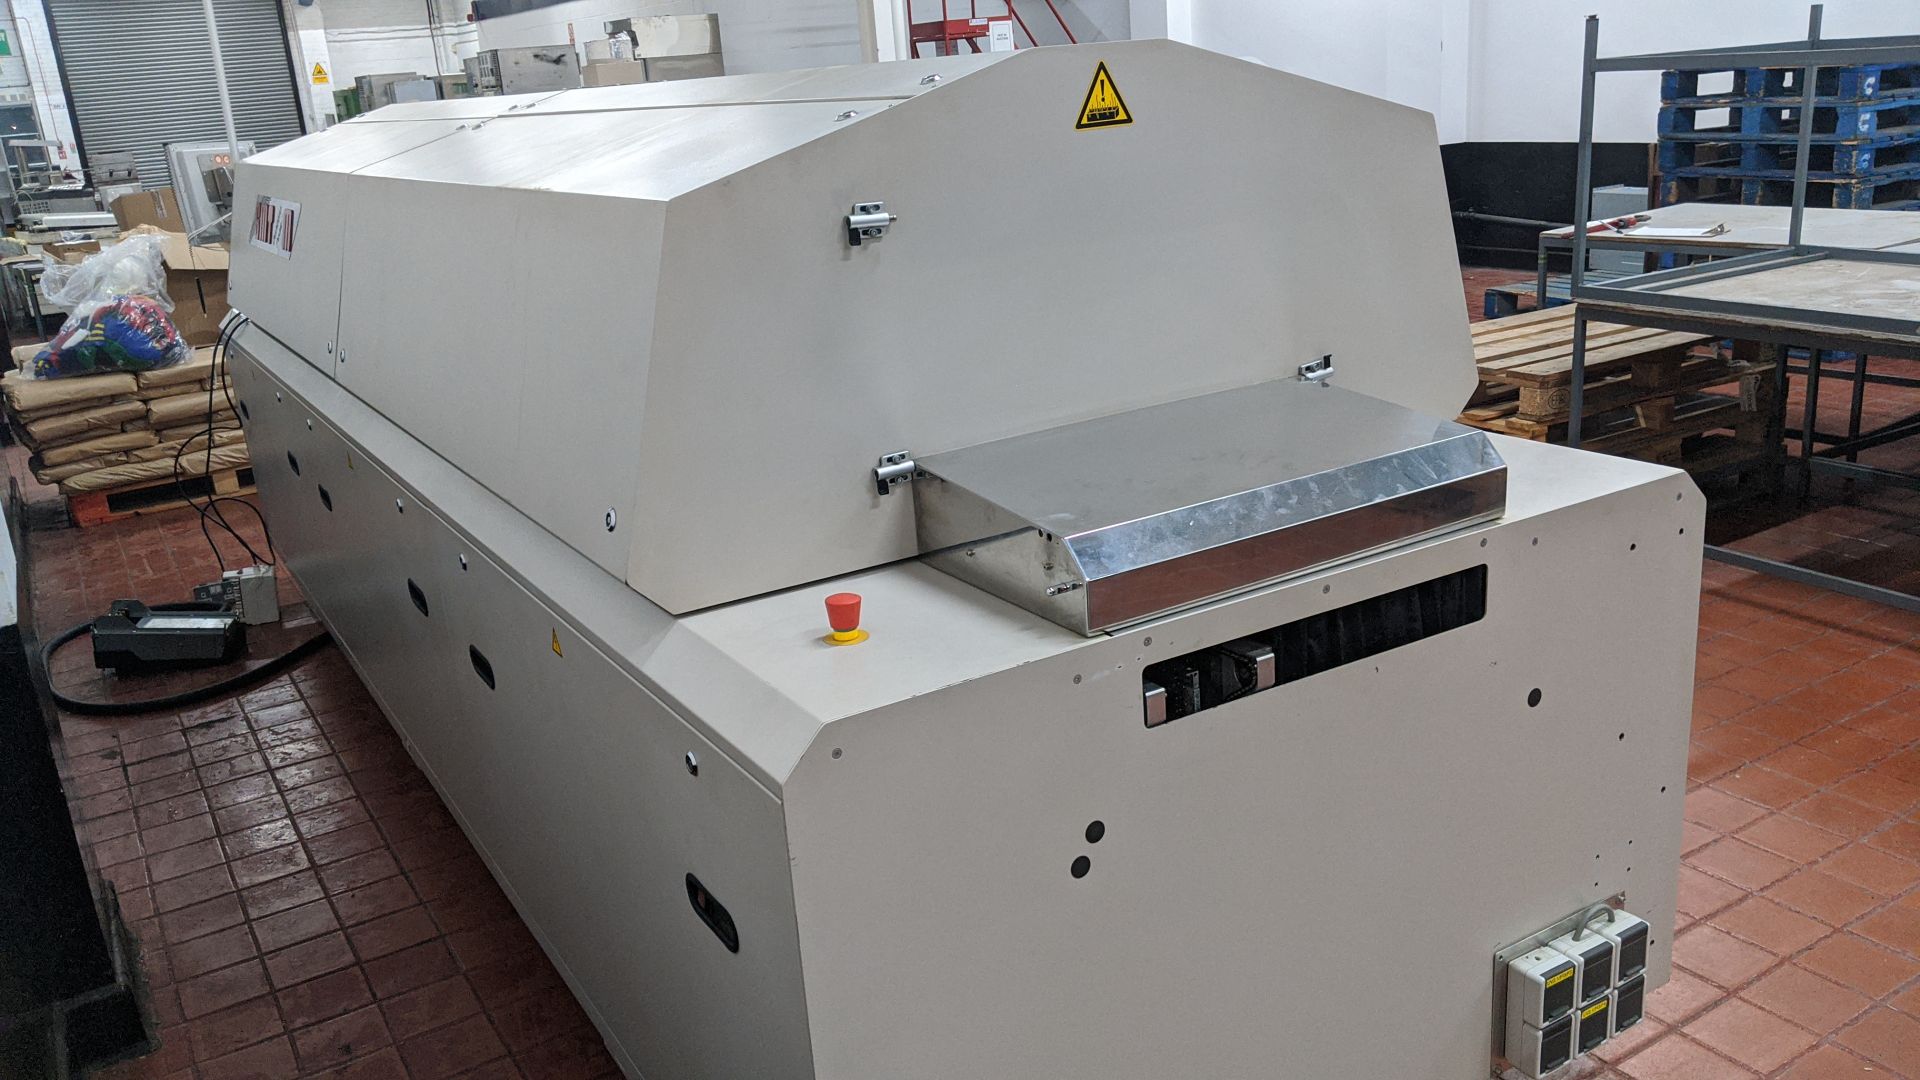 2010 SMT QUATTRO PEAK M N2 REFLOW OVEN for use in Printed Circuit Board Assembly - Image 7 of 21